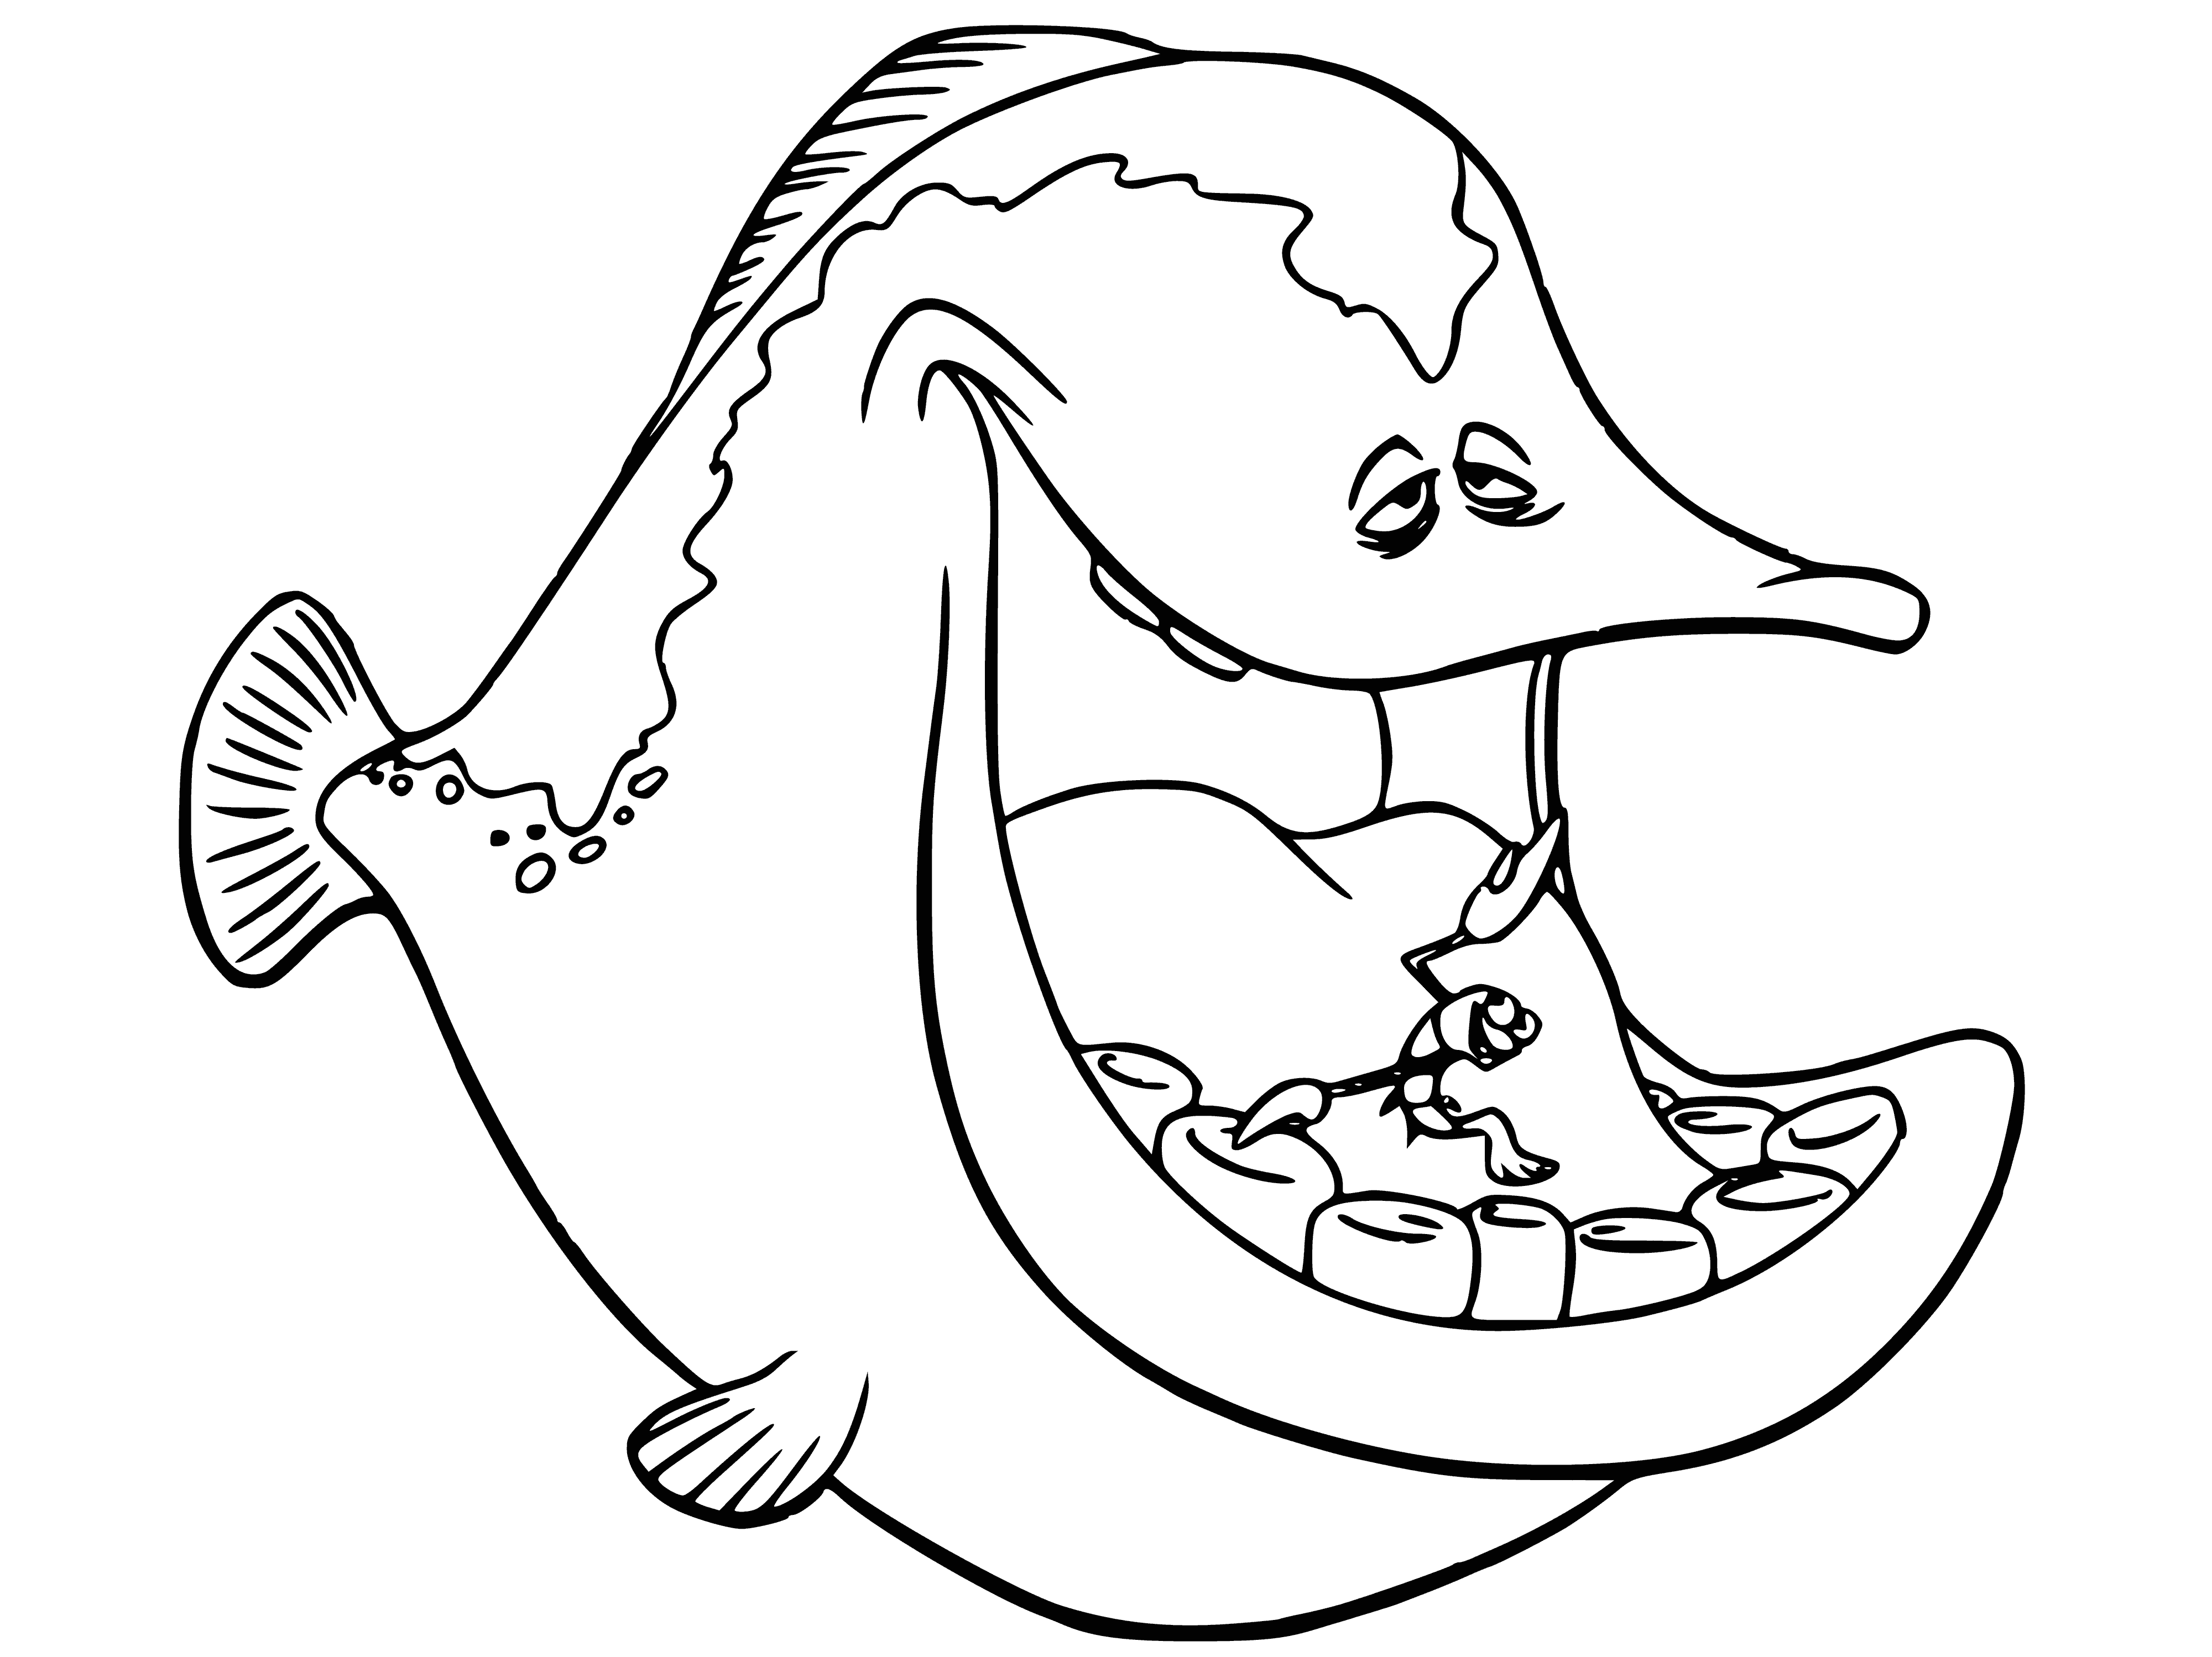 Musical fish coloring page